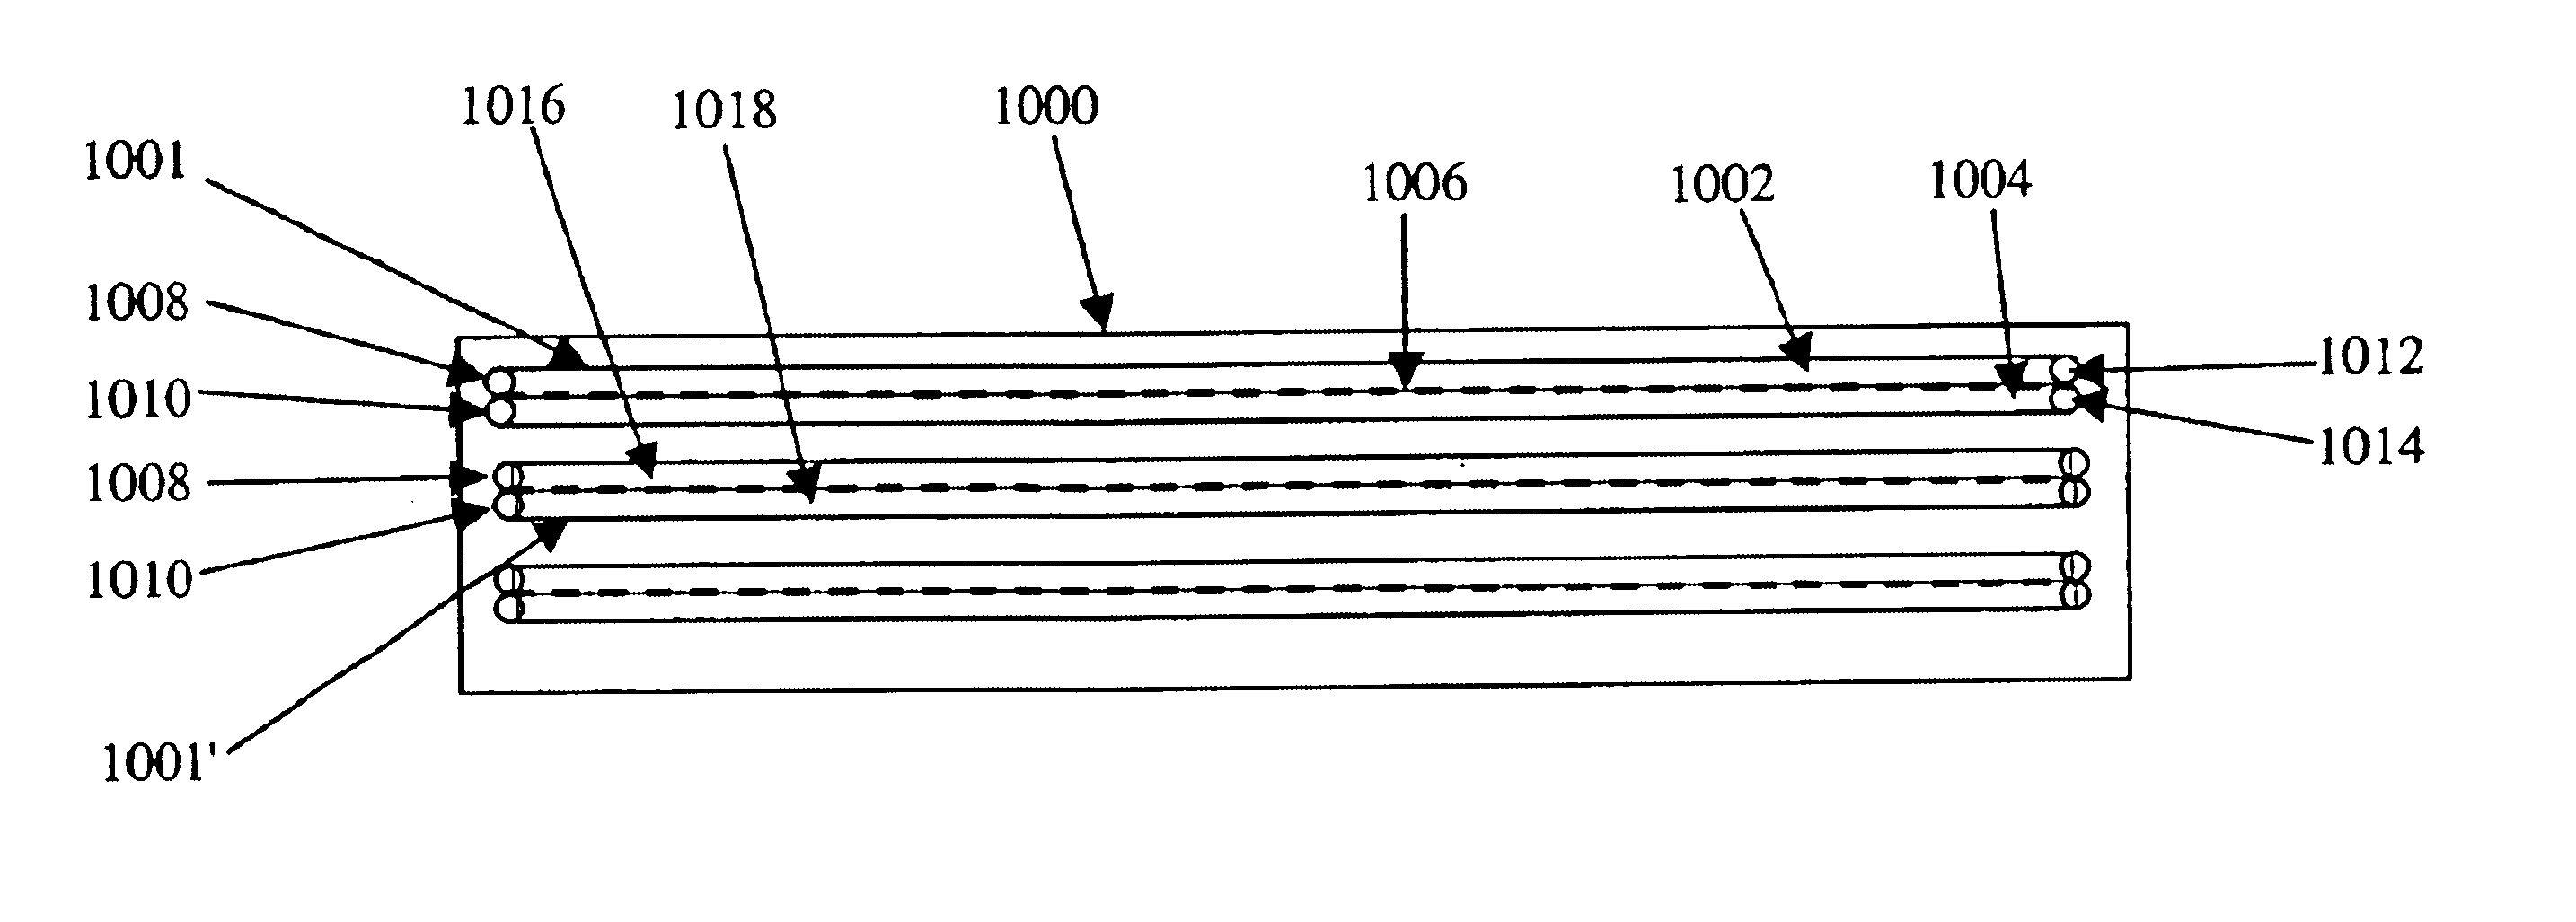 Microfluidic device with diffusion between adjacent lumens